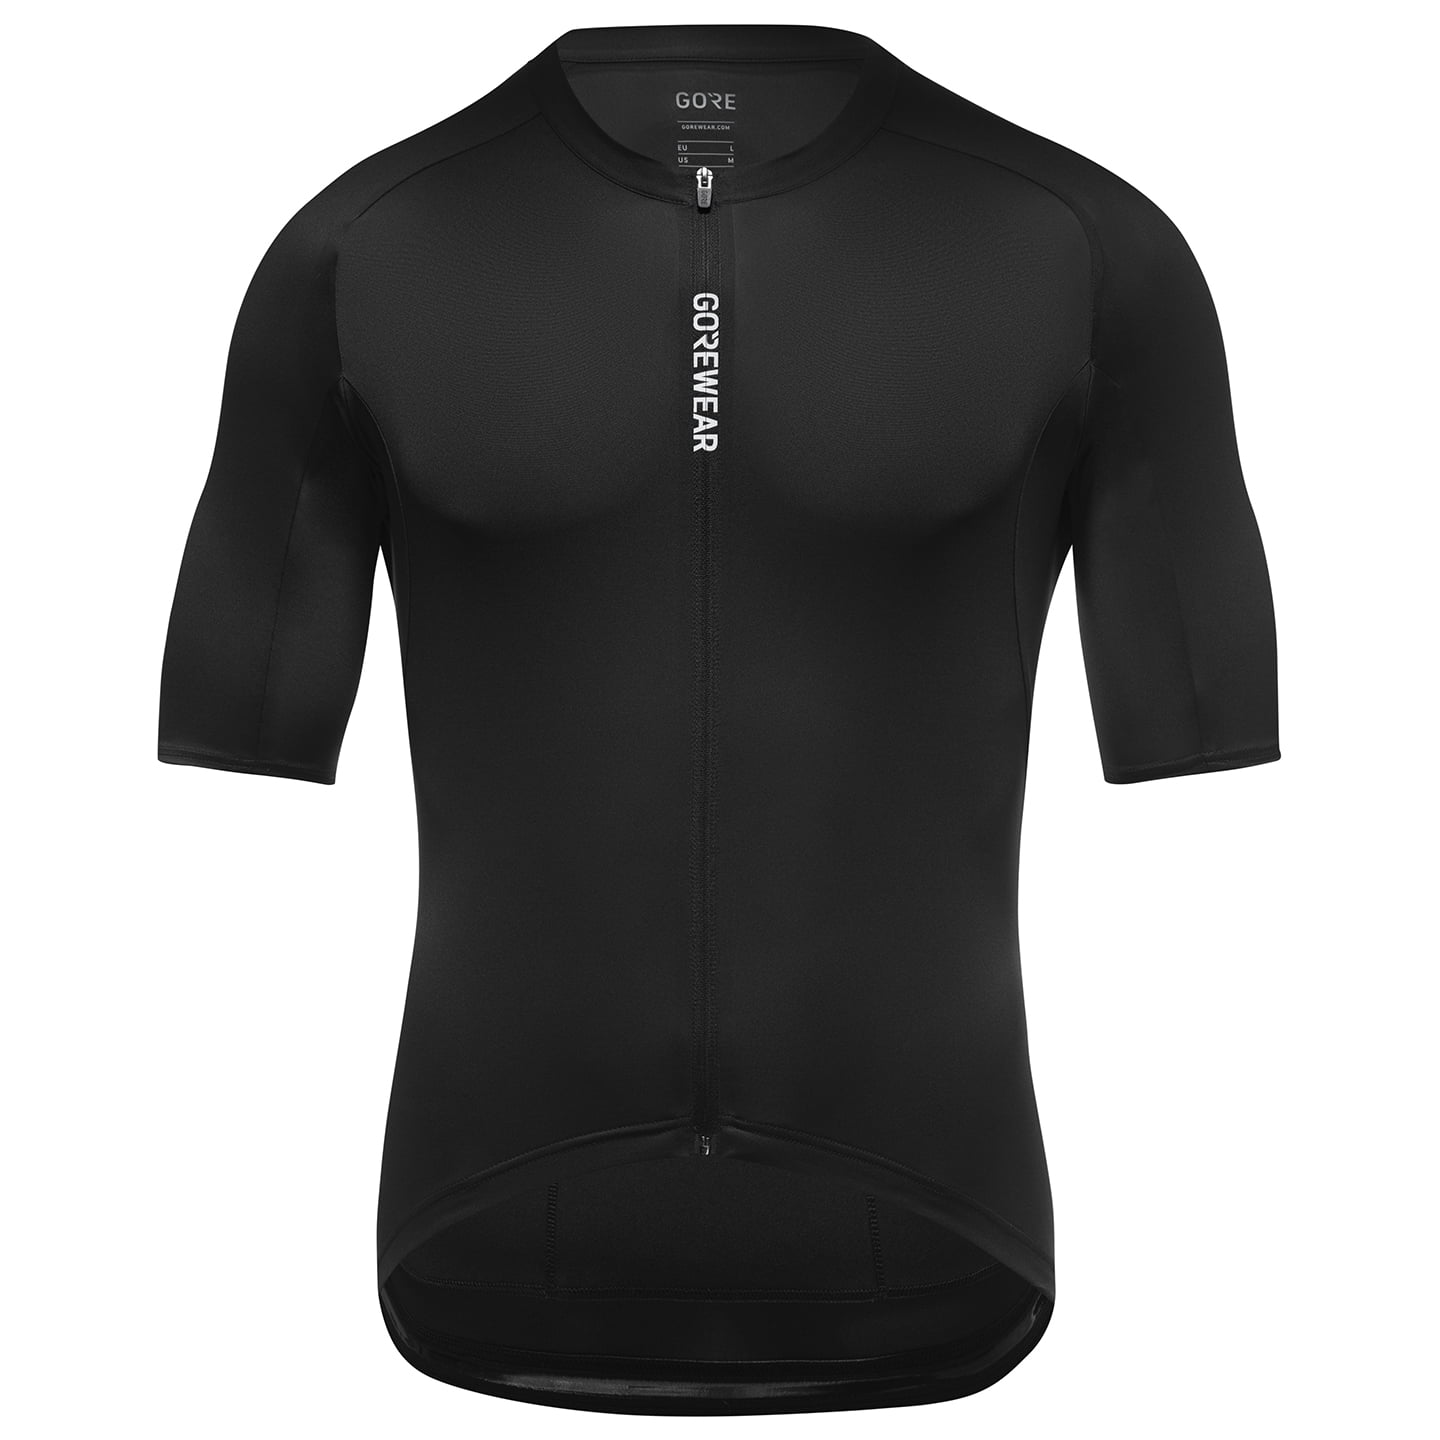 Spinshift Short Sleeve Jersey Short Sleeve Jersey, for men, size 3XL, Cycling jersey, Cycle clothing